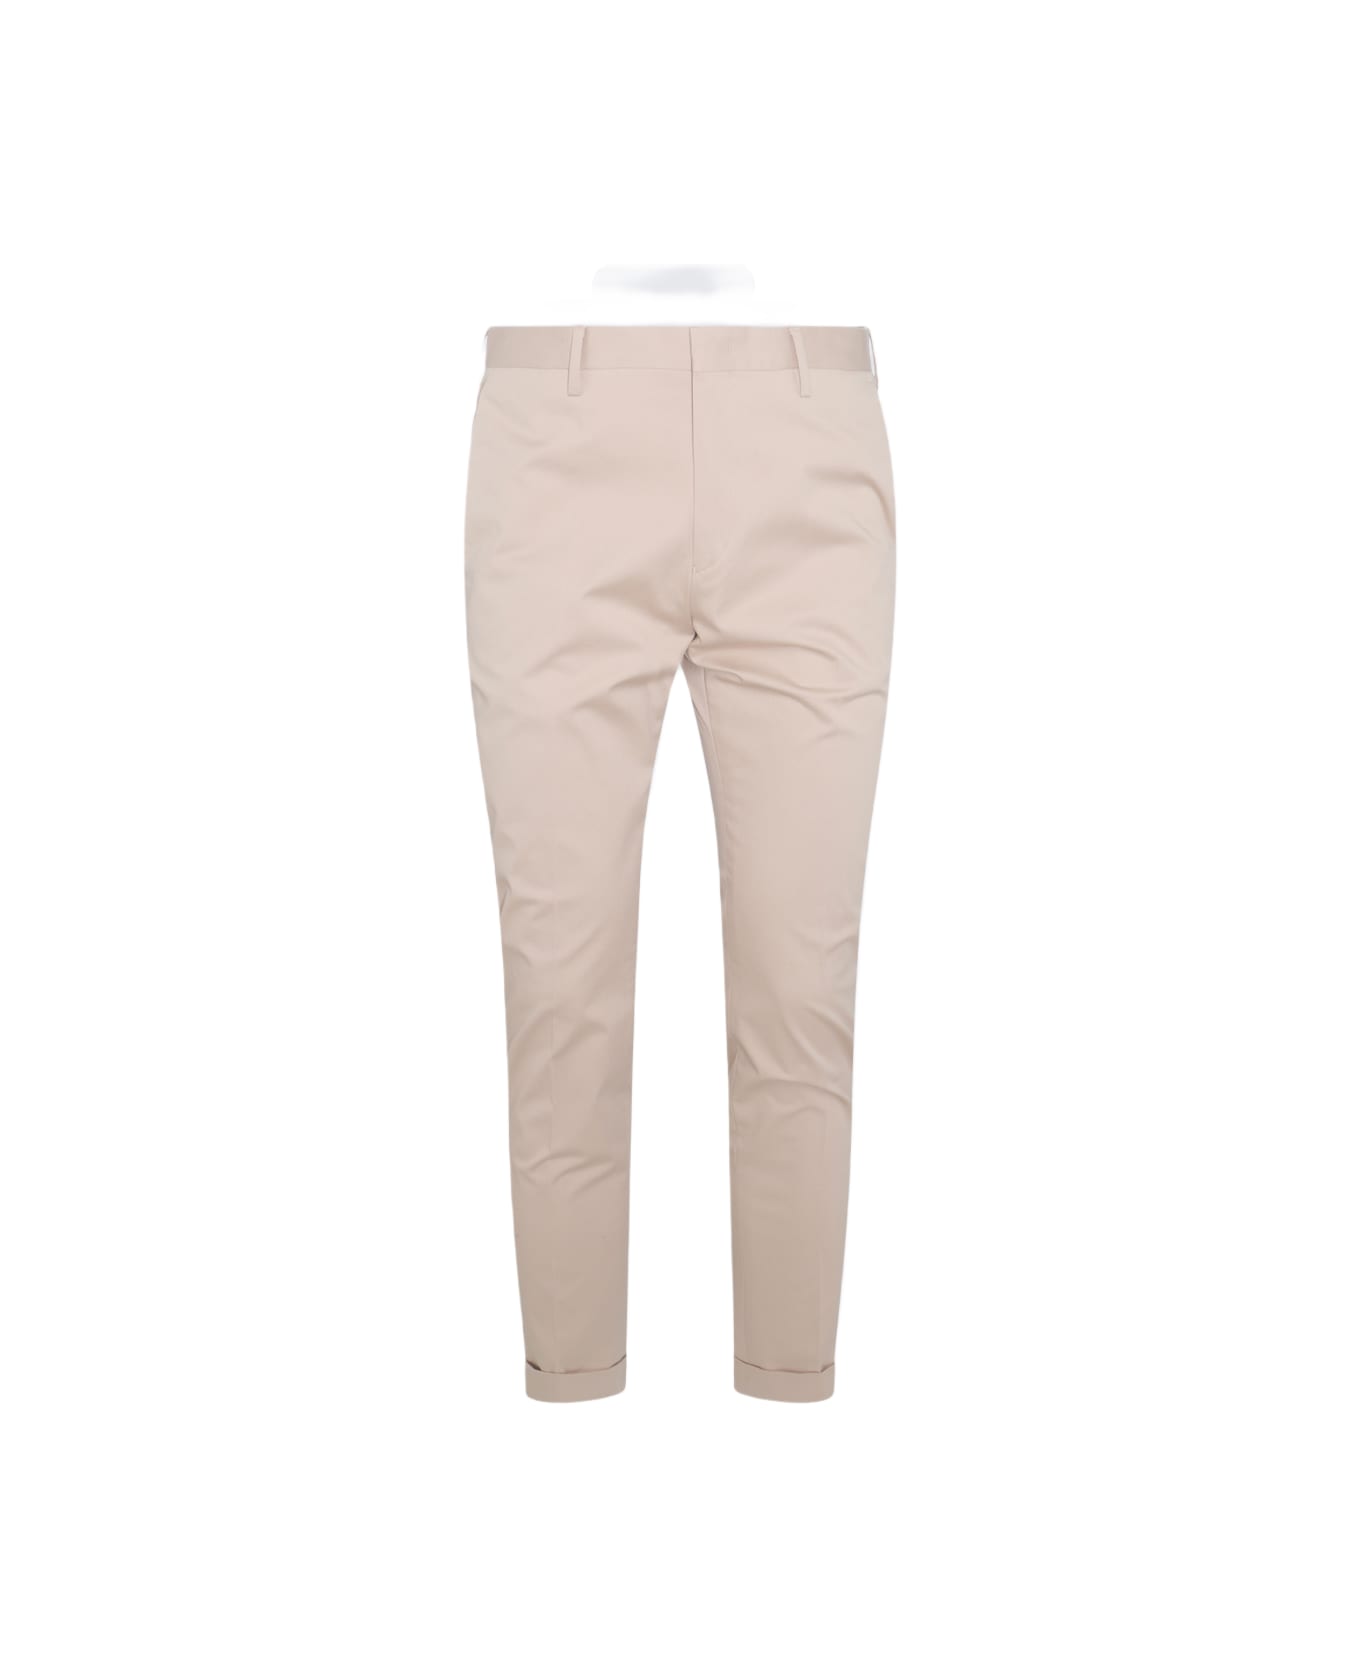 Paul Smith Beige Cotton Blend Trousers - SAND ボトムス